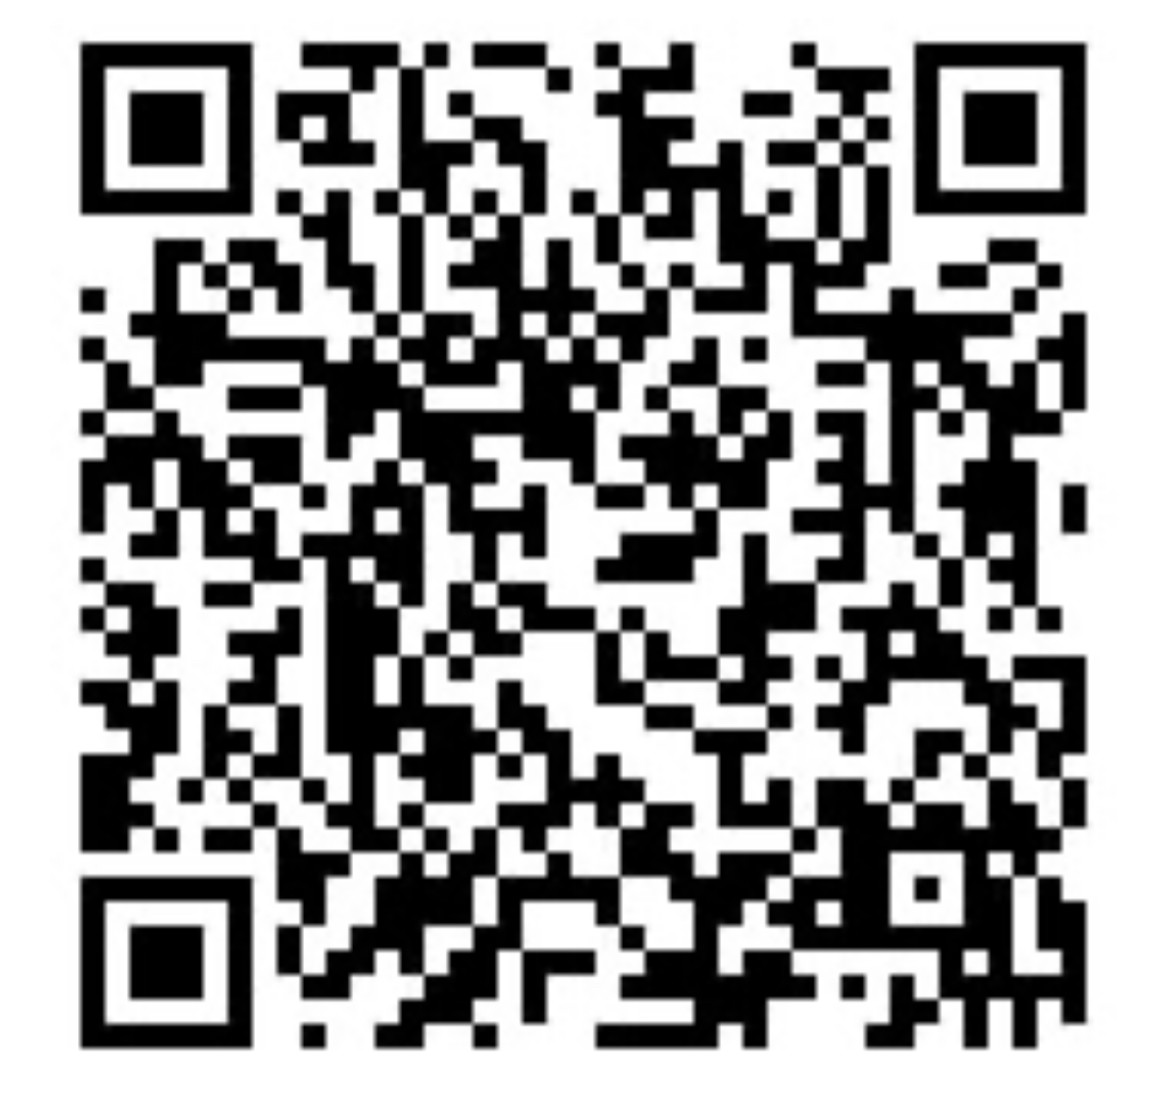 QRcode AB paysage